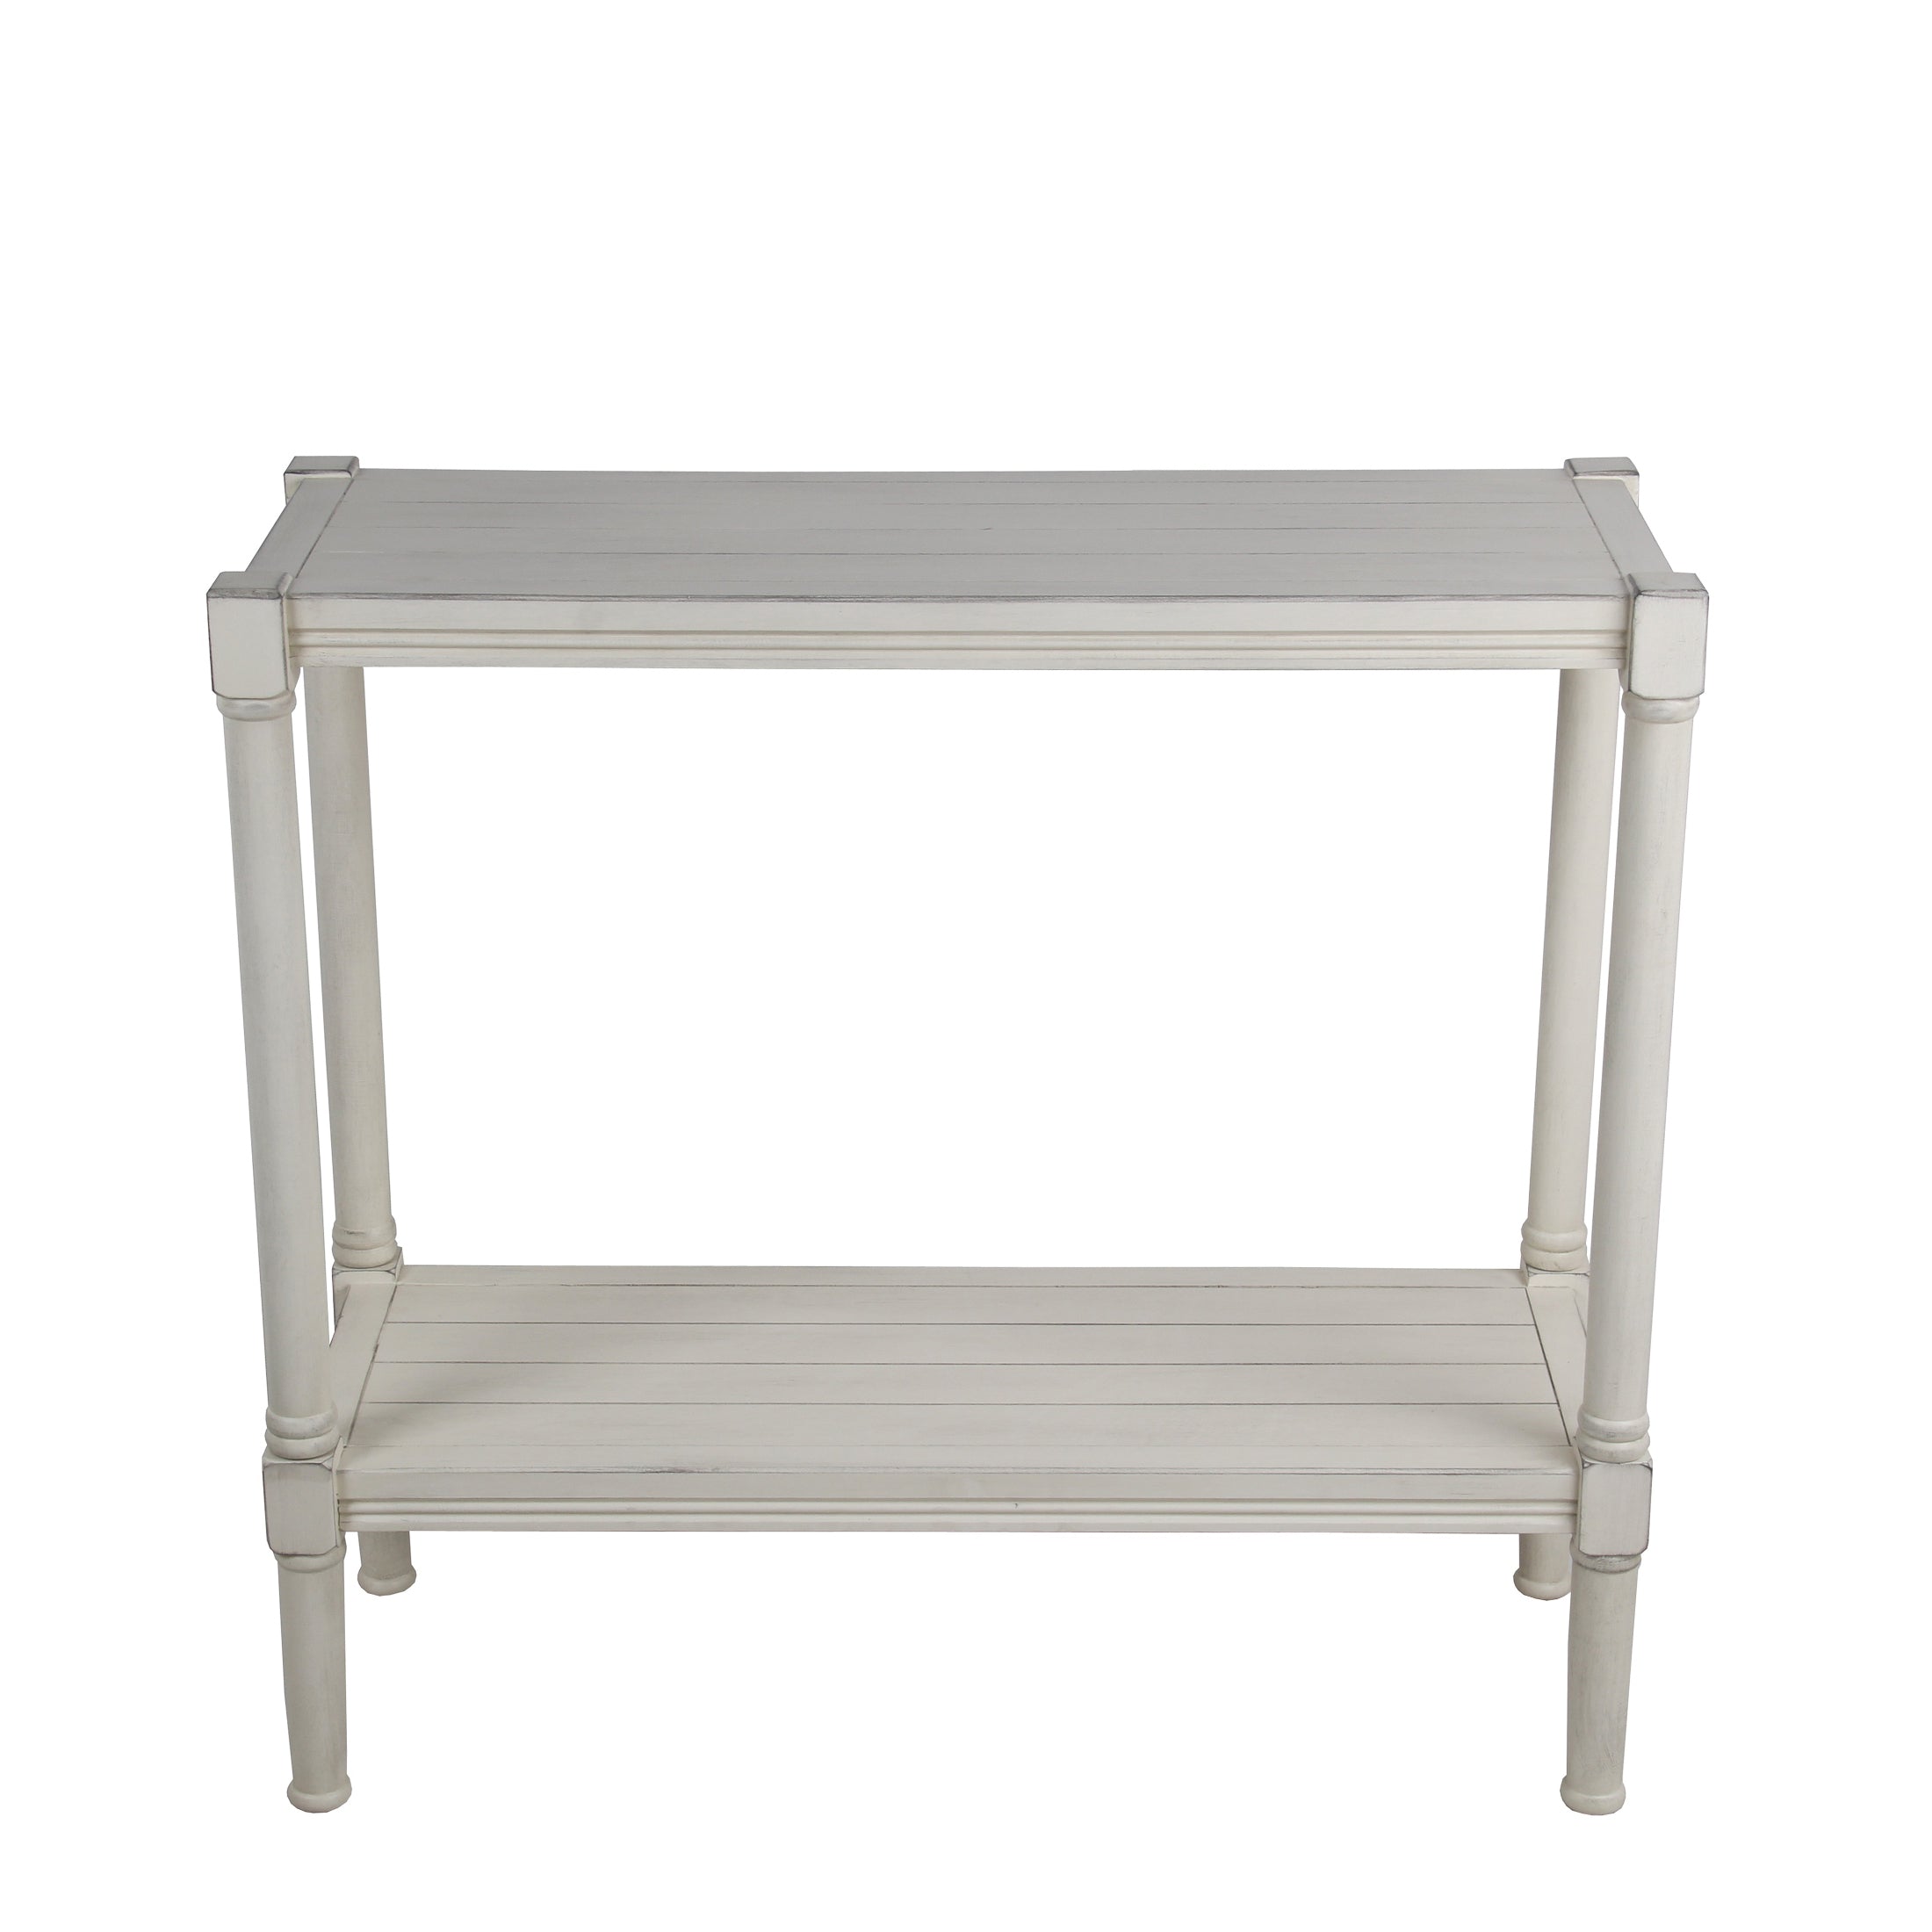 Wooden Rectangular Console Table with One Spacious Open Shelf, White